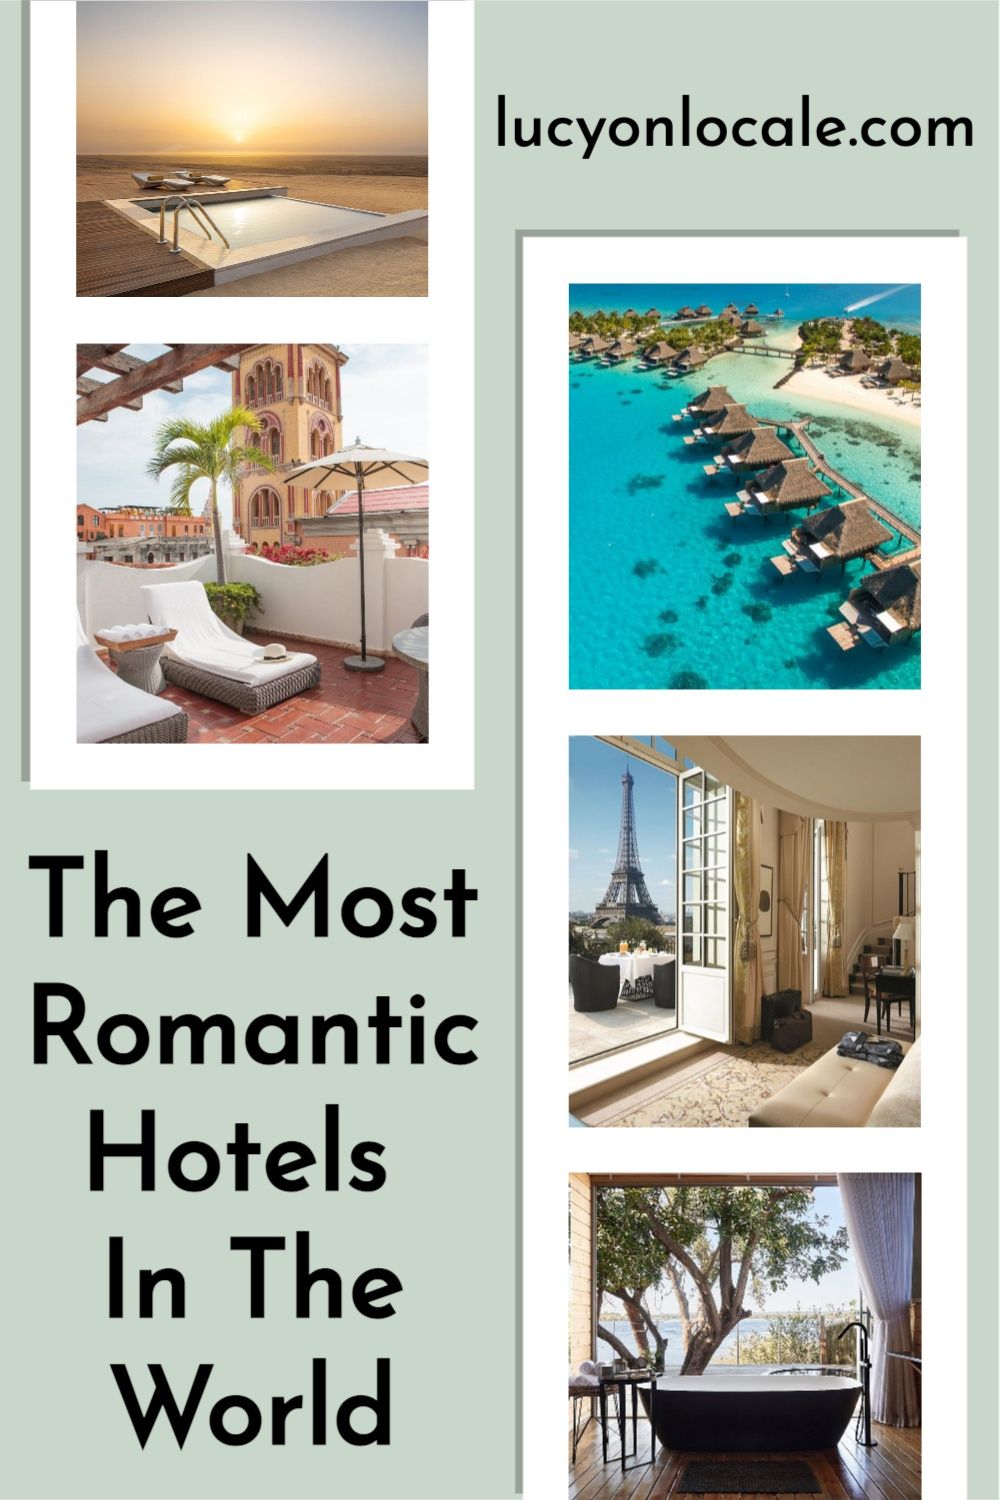 The Most Romantic Hotels in The World